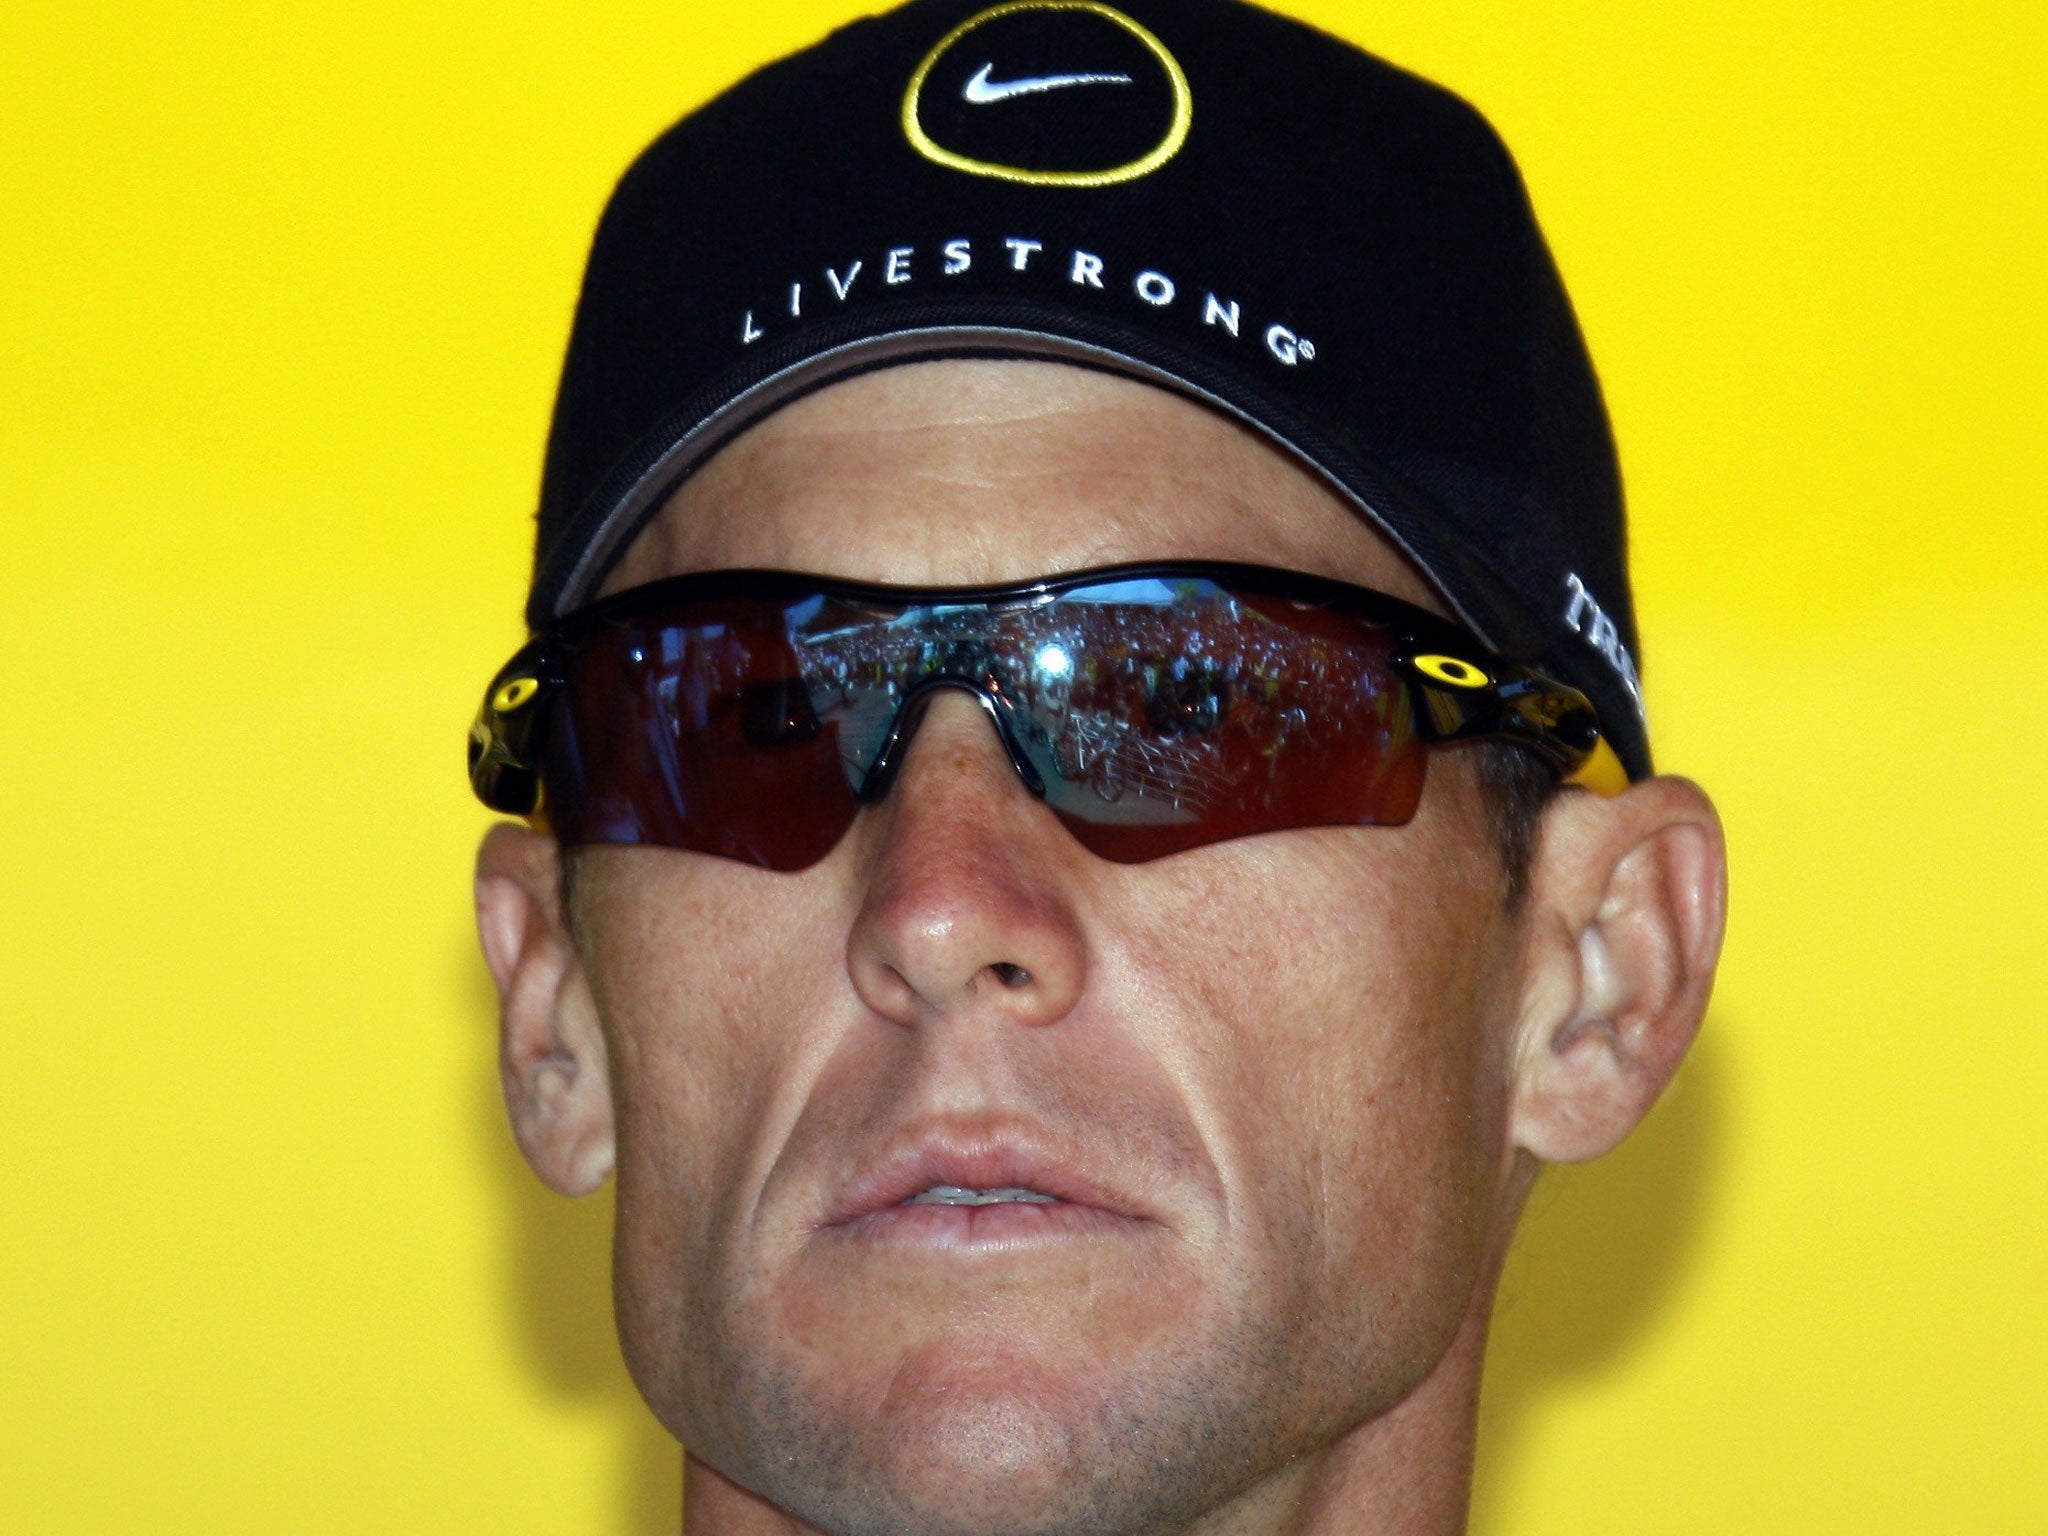 Lance Armstrong: The Oprah interview will air on 17 January